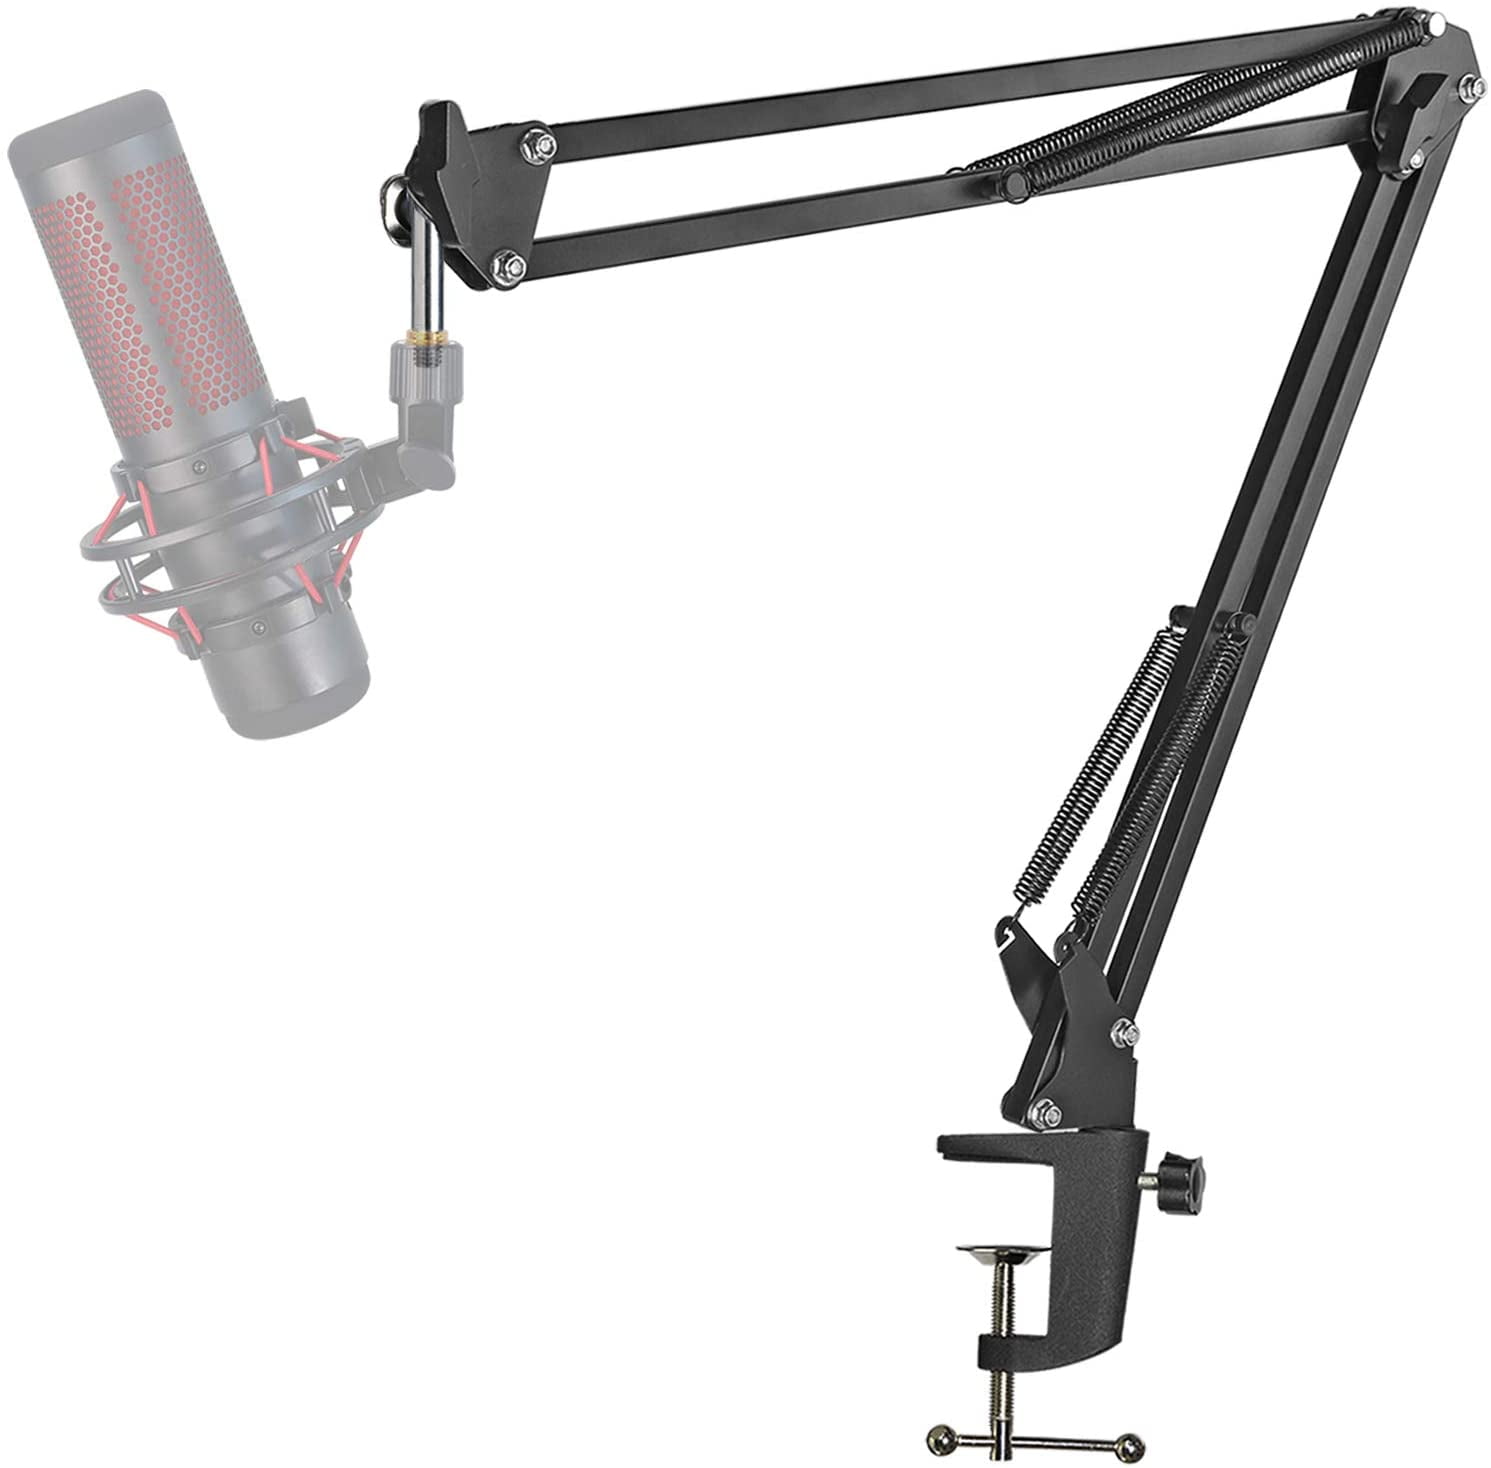 Scissor Mic Boom Arm and 3 Layers Windscreen Compatible with Hyperx Quadcast S to Improve Sound Quality by YOUSHARES Hyperx Quadcast Mic Stand with Pop Filter 